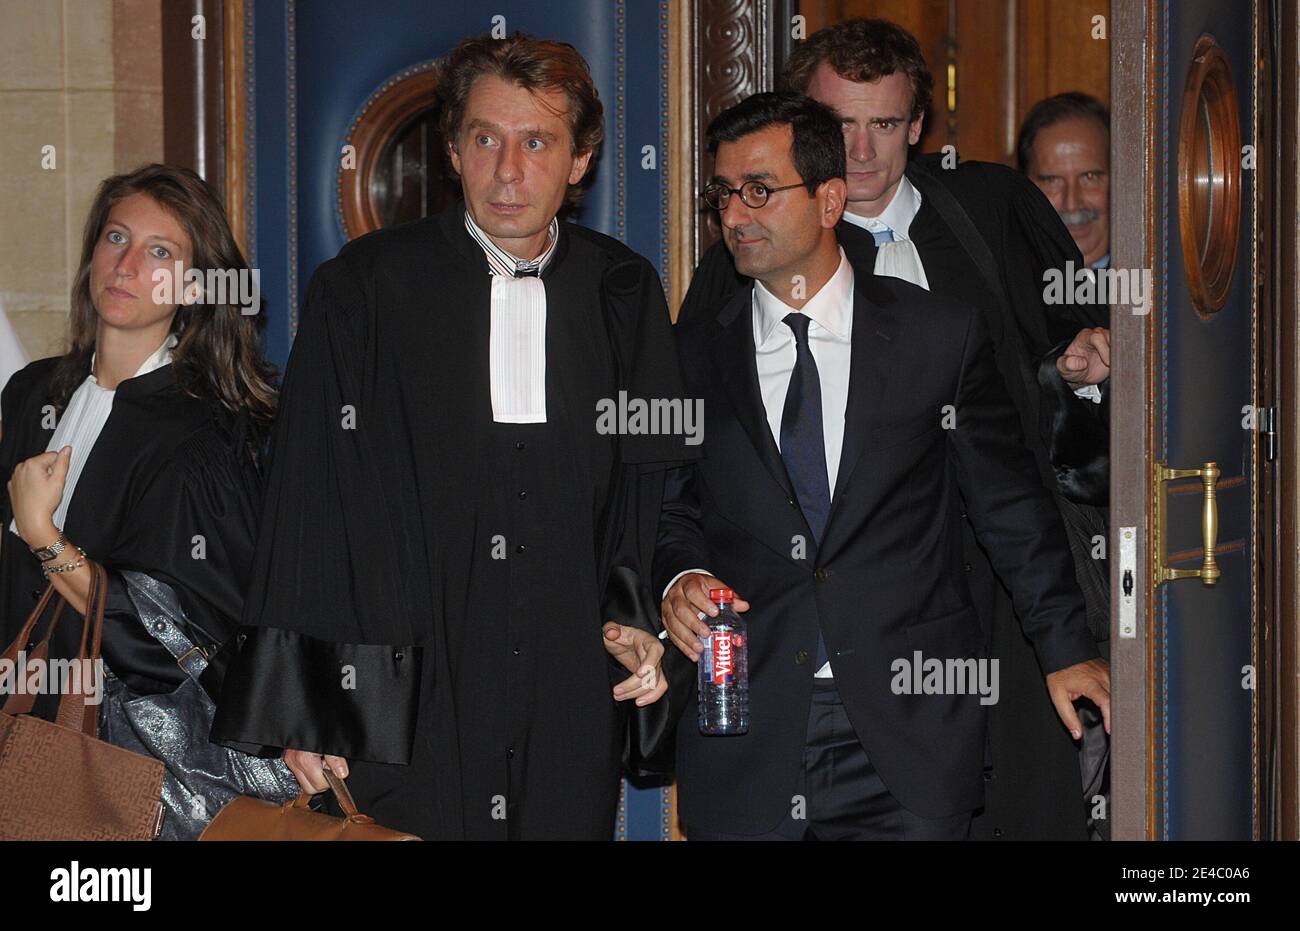 EADS ex-research chief Imad Lahoud leaves after the 1st day of the  so-called 'Clearstream affair' trial, at Paris' courthouse, France on  September 21, 2009. French former prime minister and foreign minister  Dominique